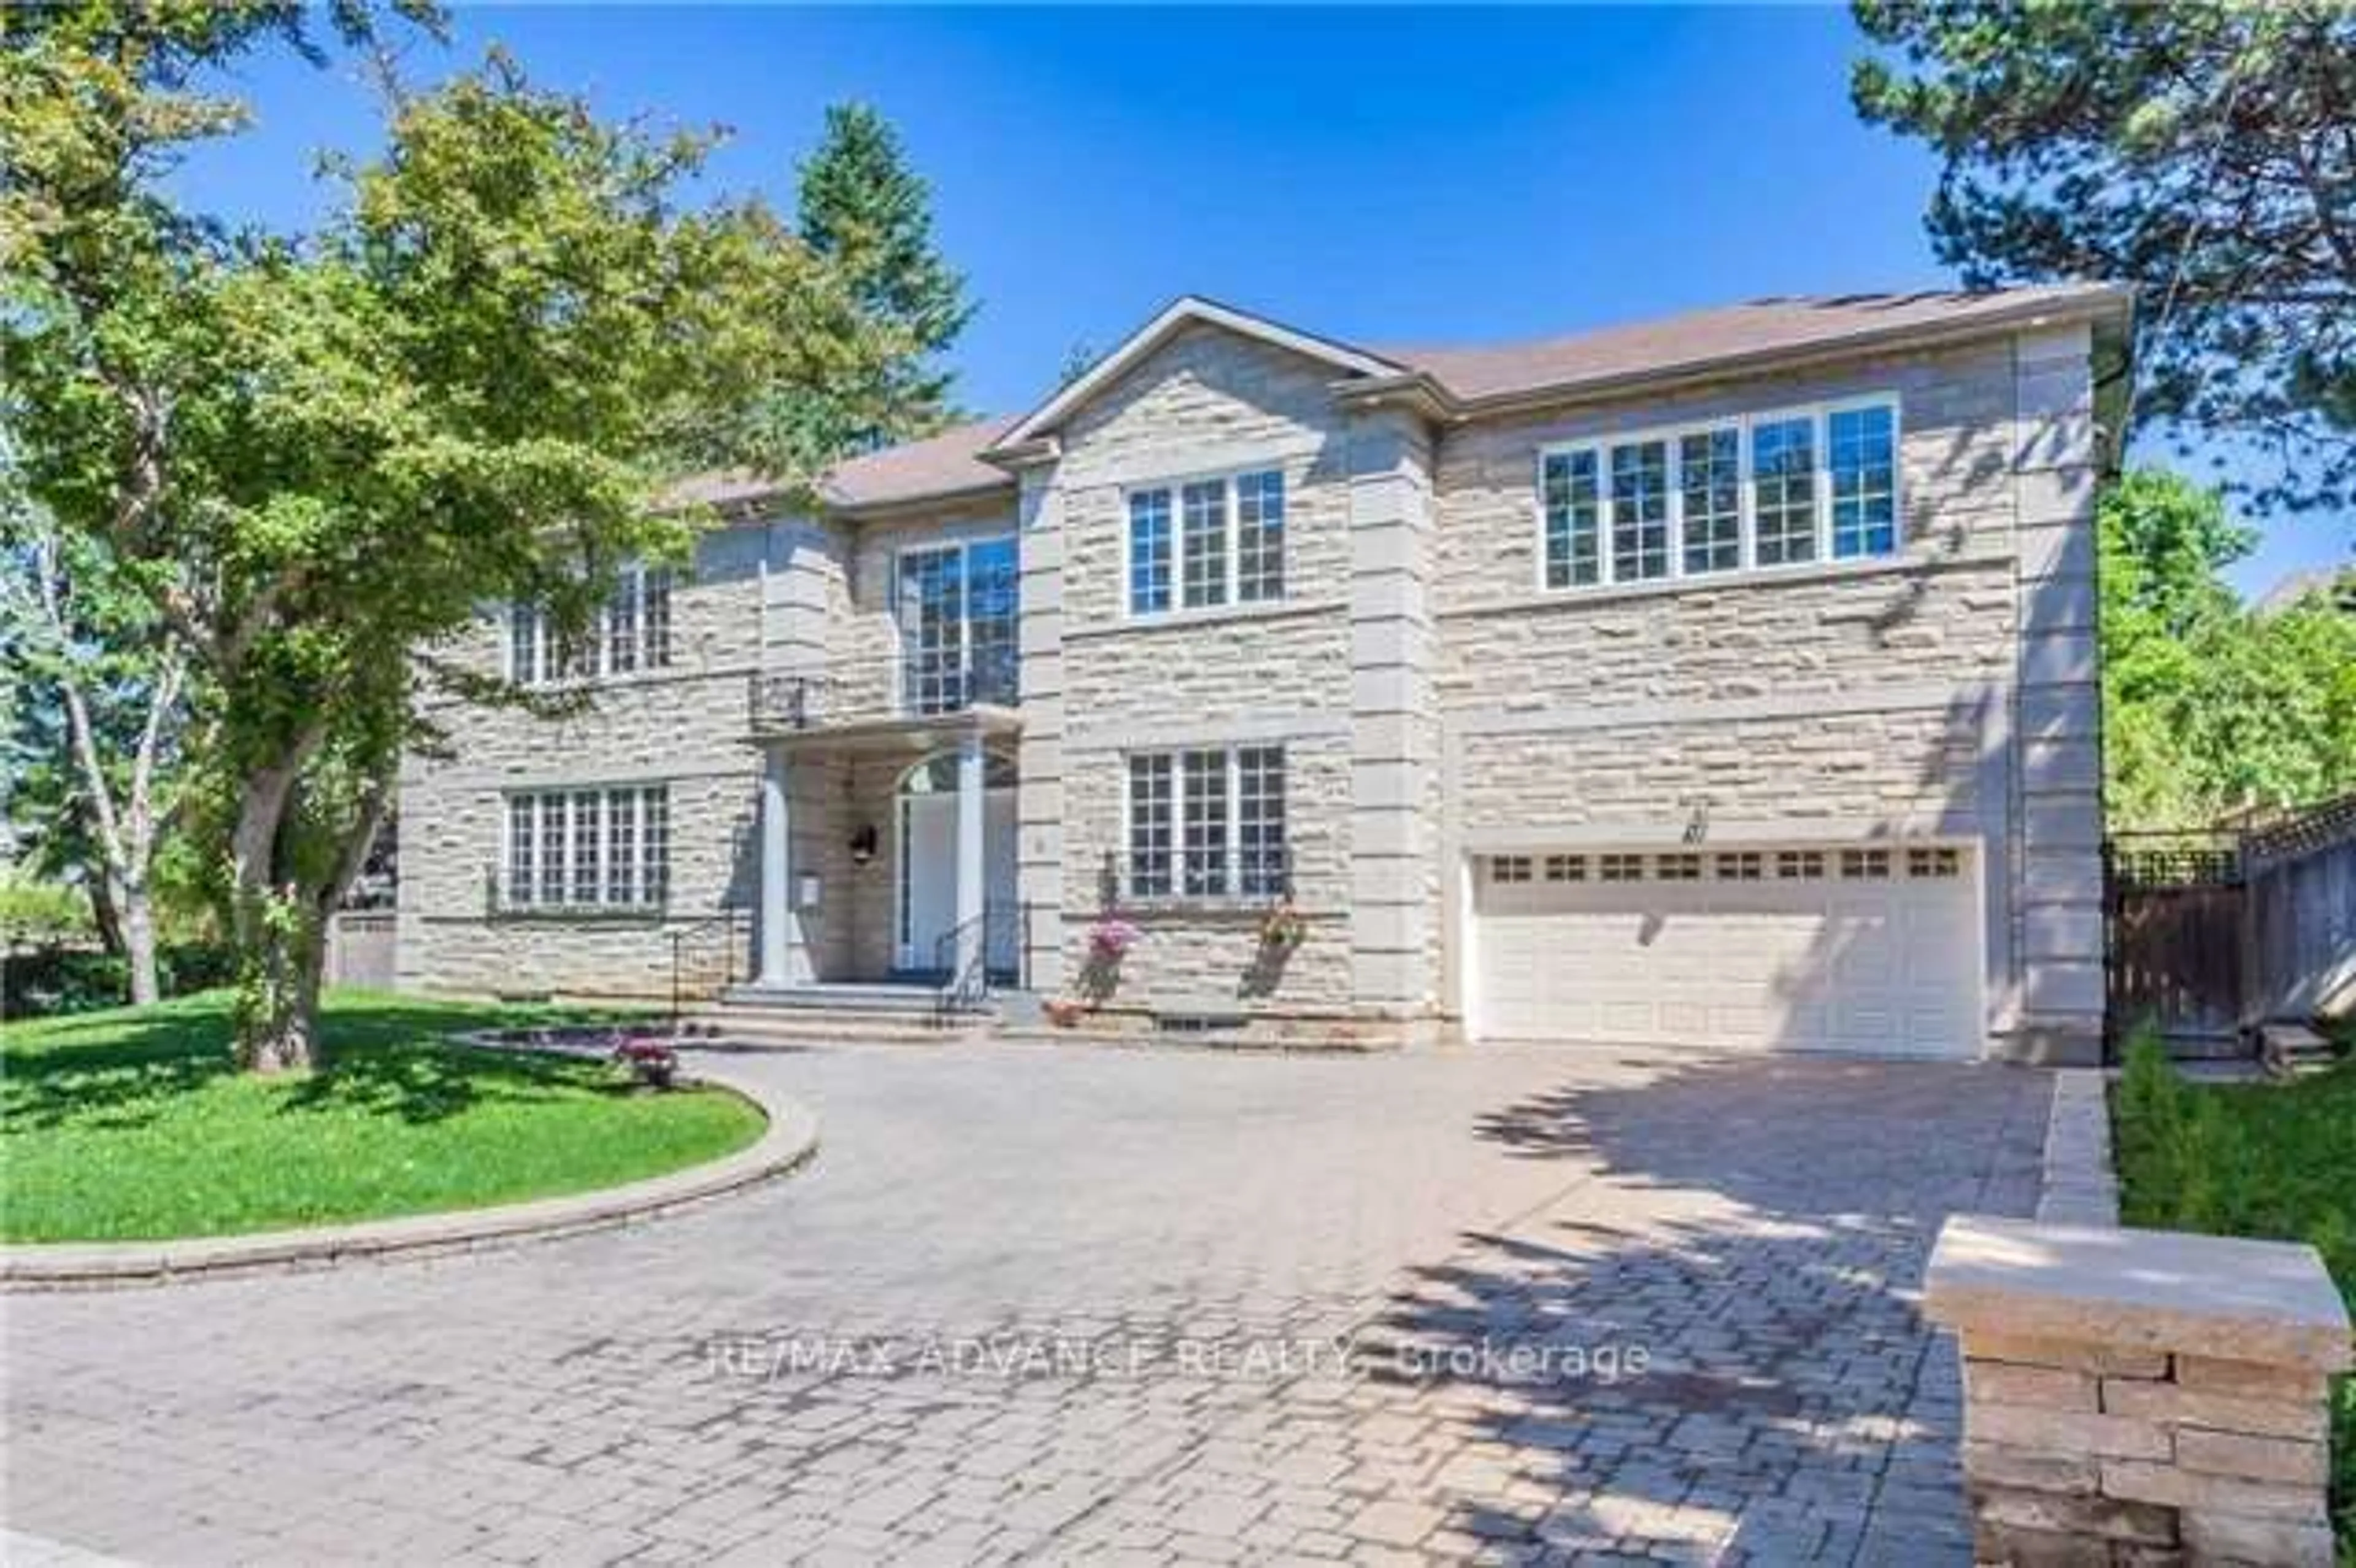 Home with brick exterior material for 8 Shady Oaks Cres, Toronto Ontario M3C 2L5